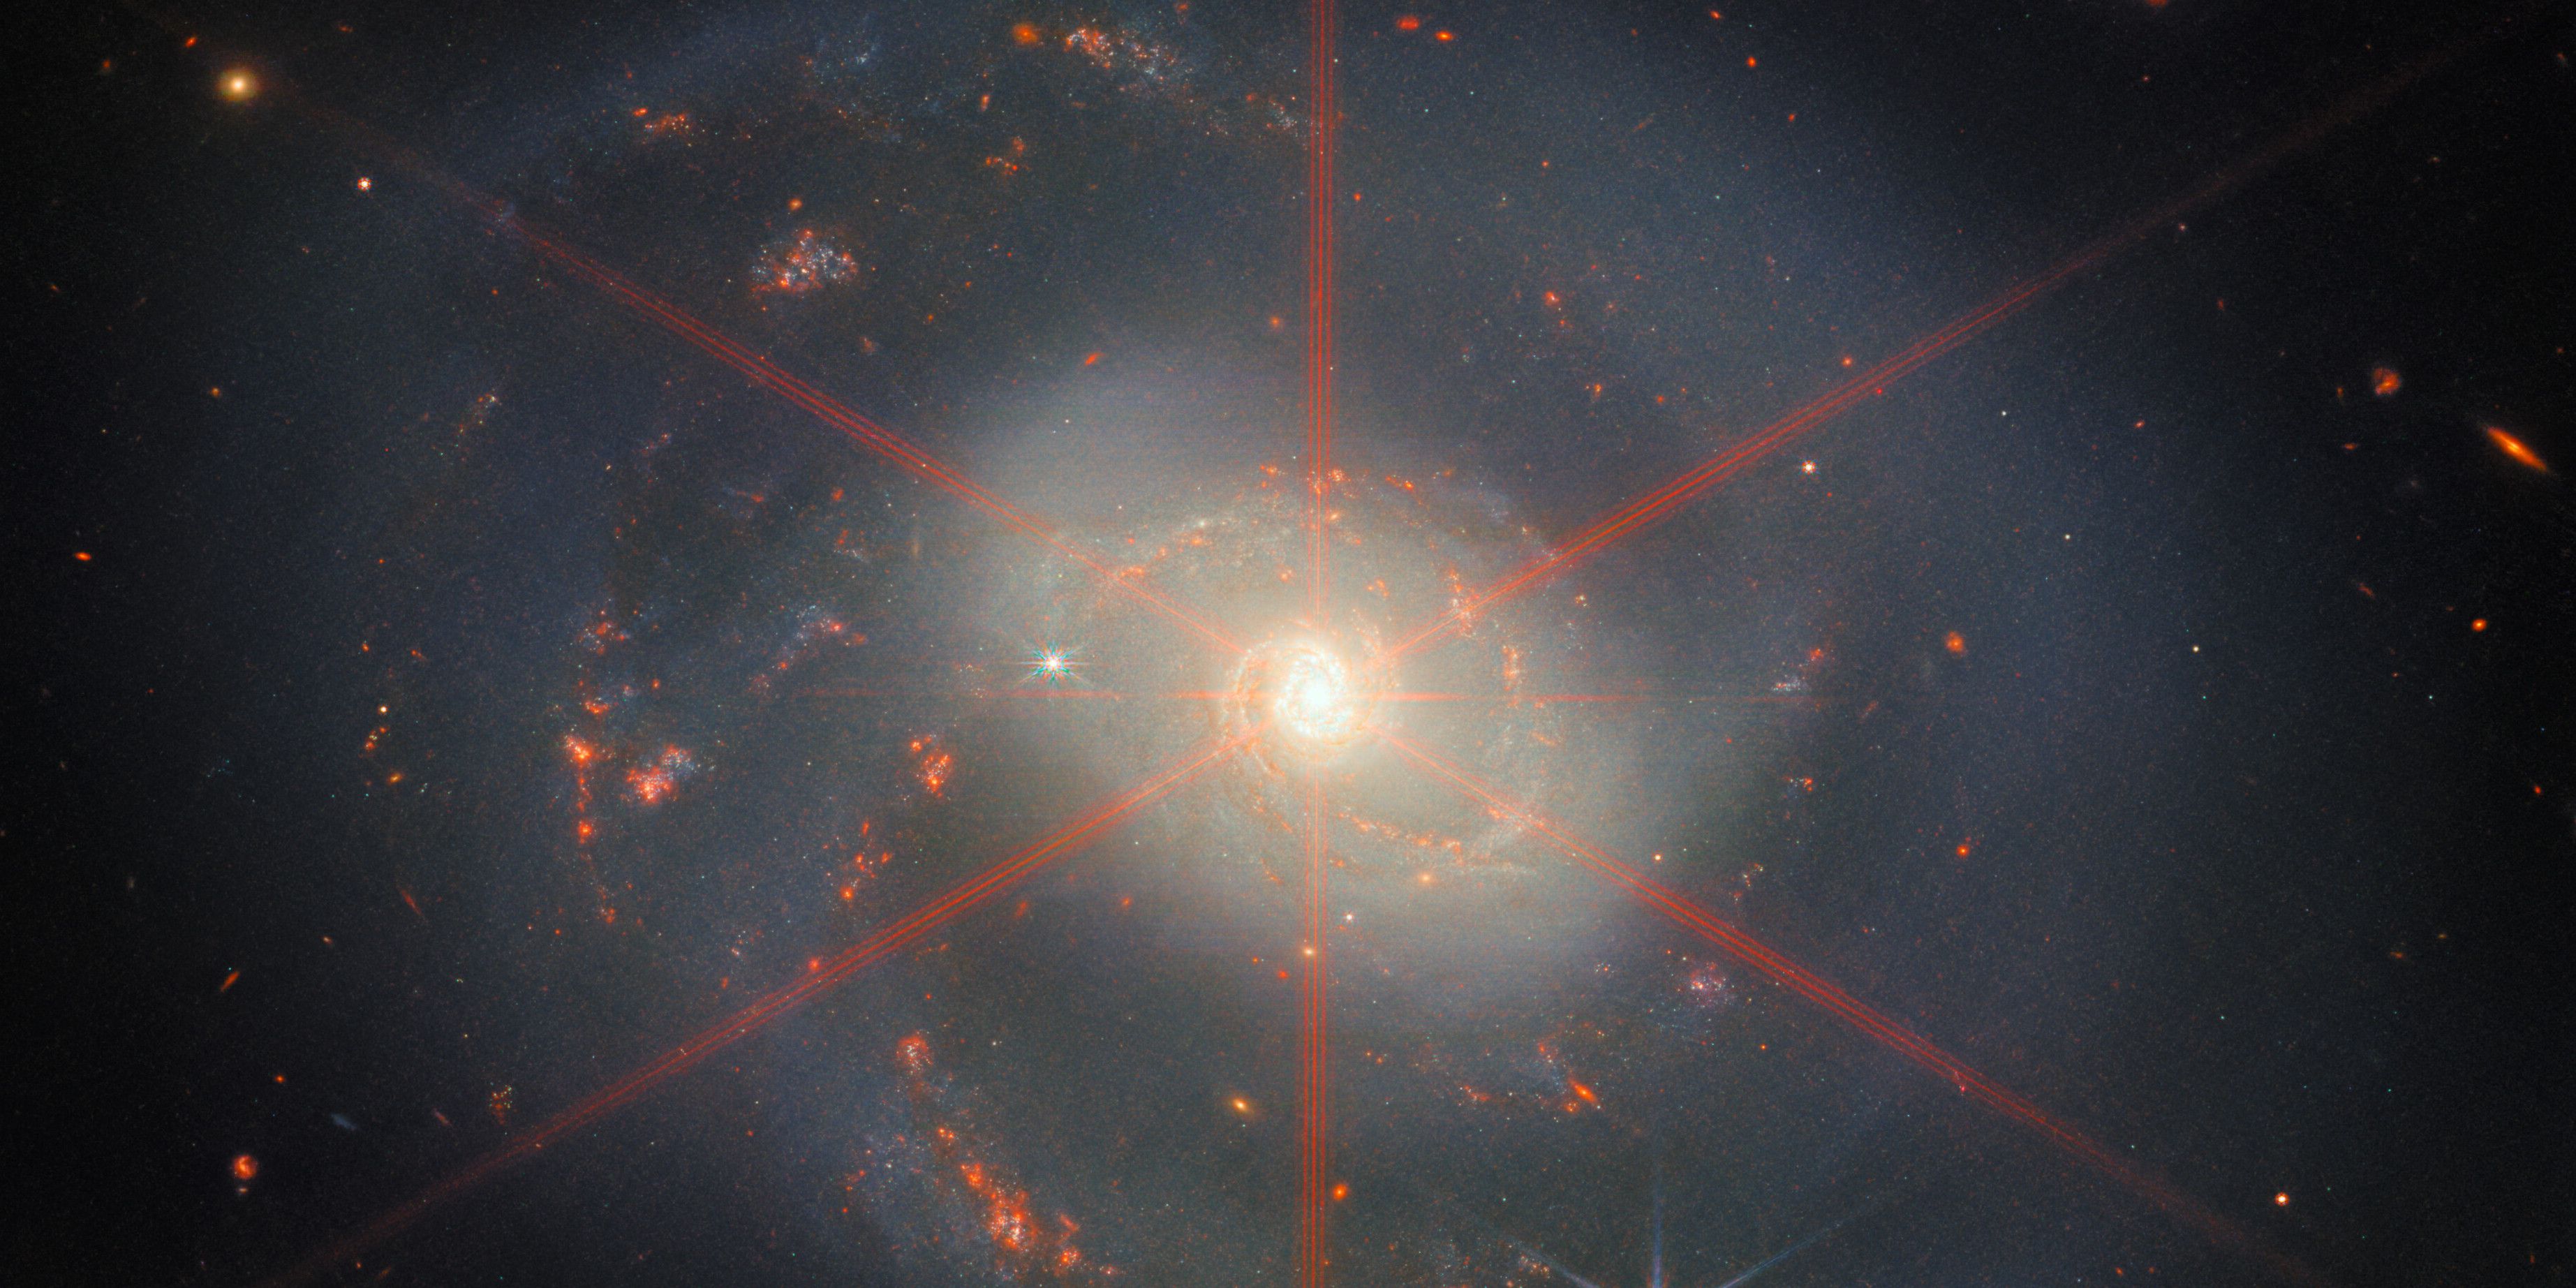 An image from the James Webb Space Telescope showing a bright, spiral galaxy with six red beams emanating from its center